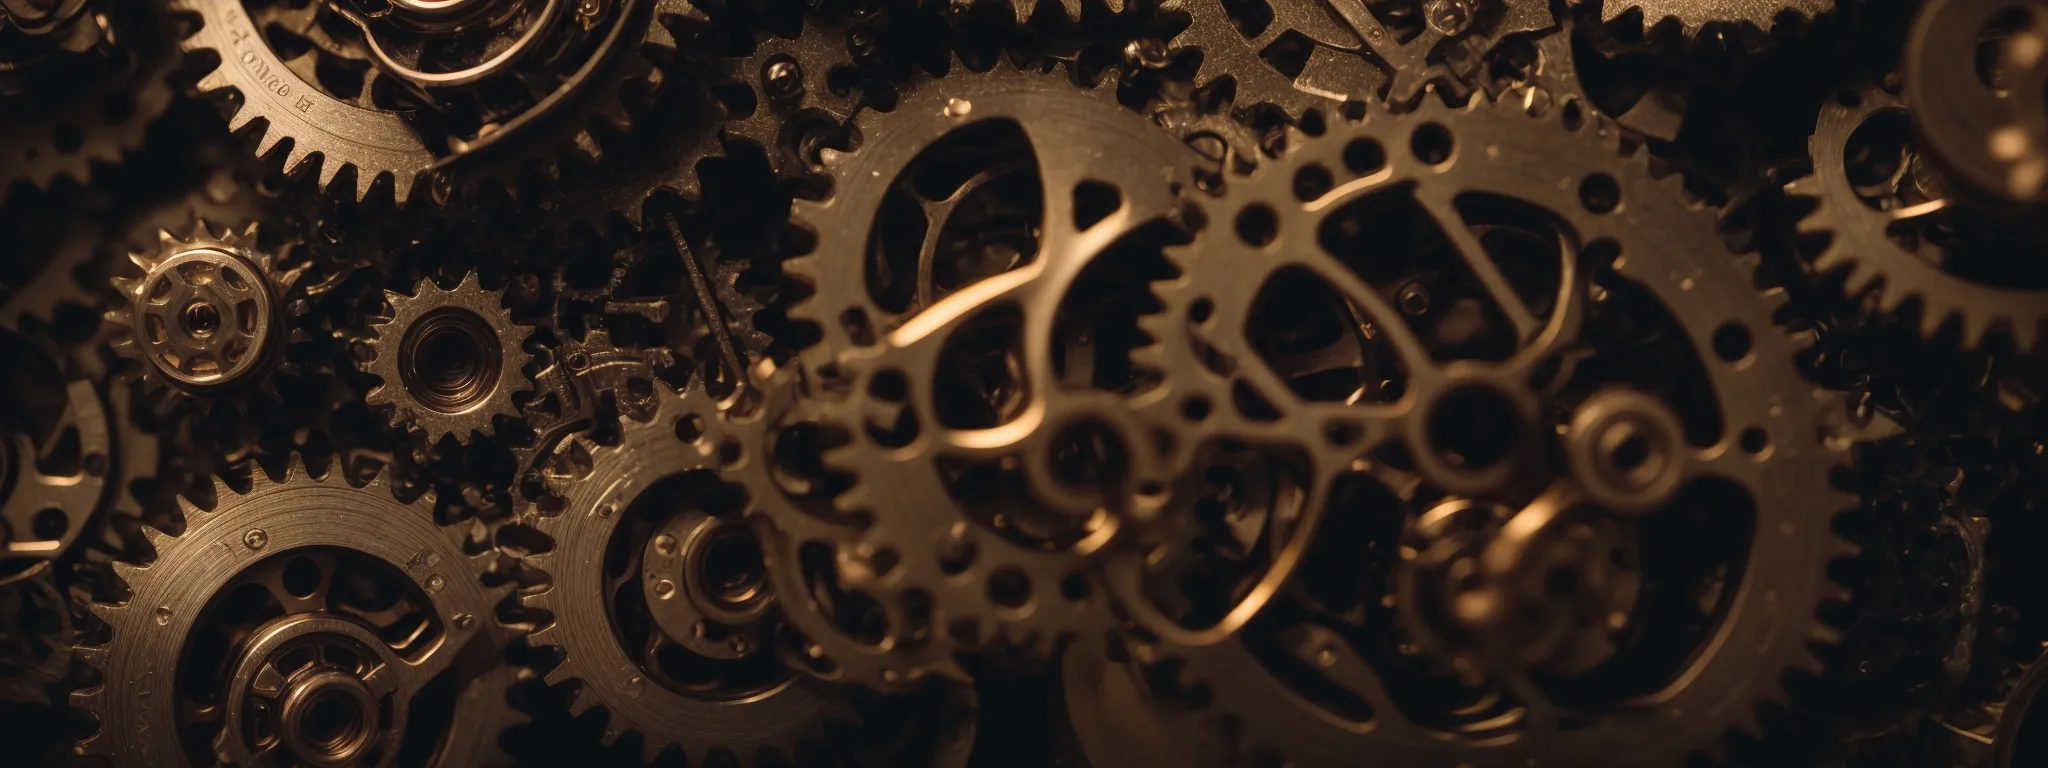 an intricate network of interconnected gears symbolizing the complex machinery of a well-optimized technical seo strategy.